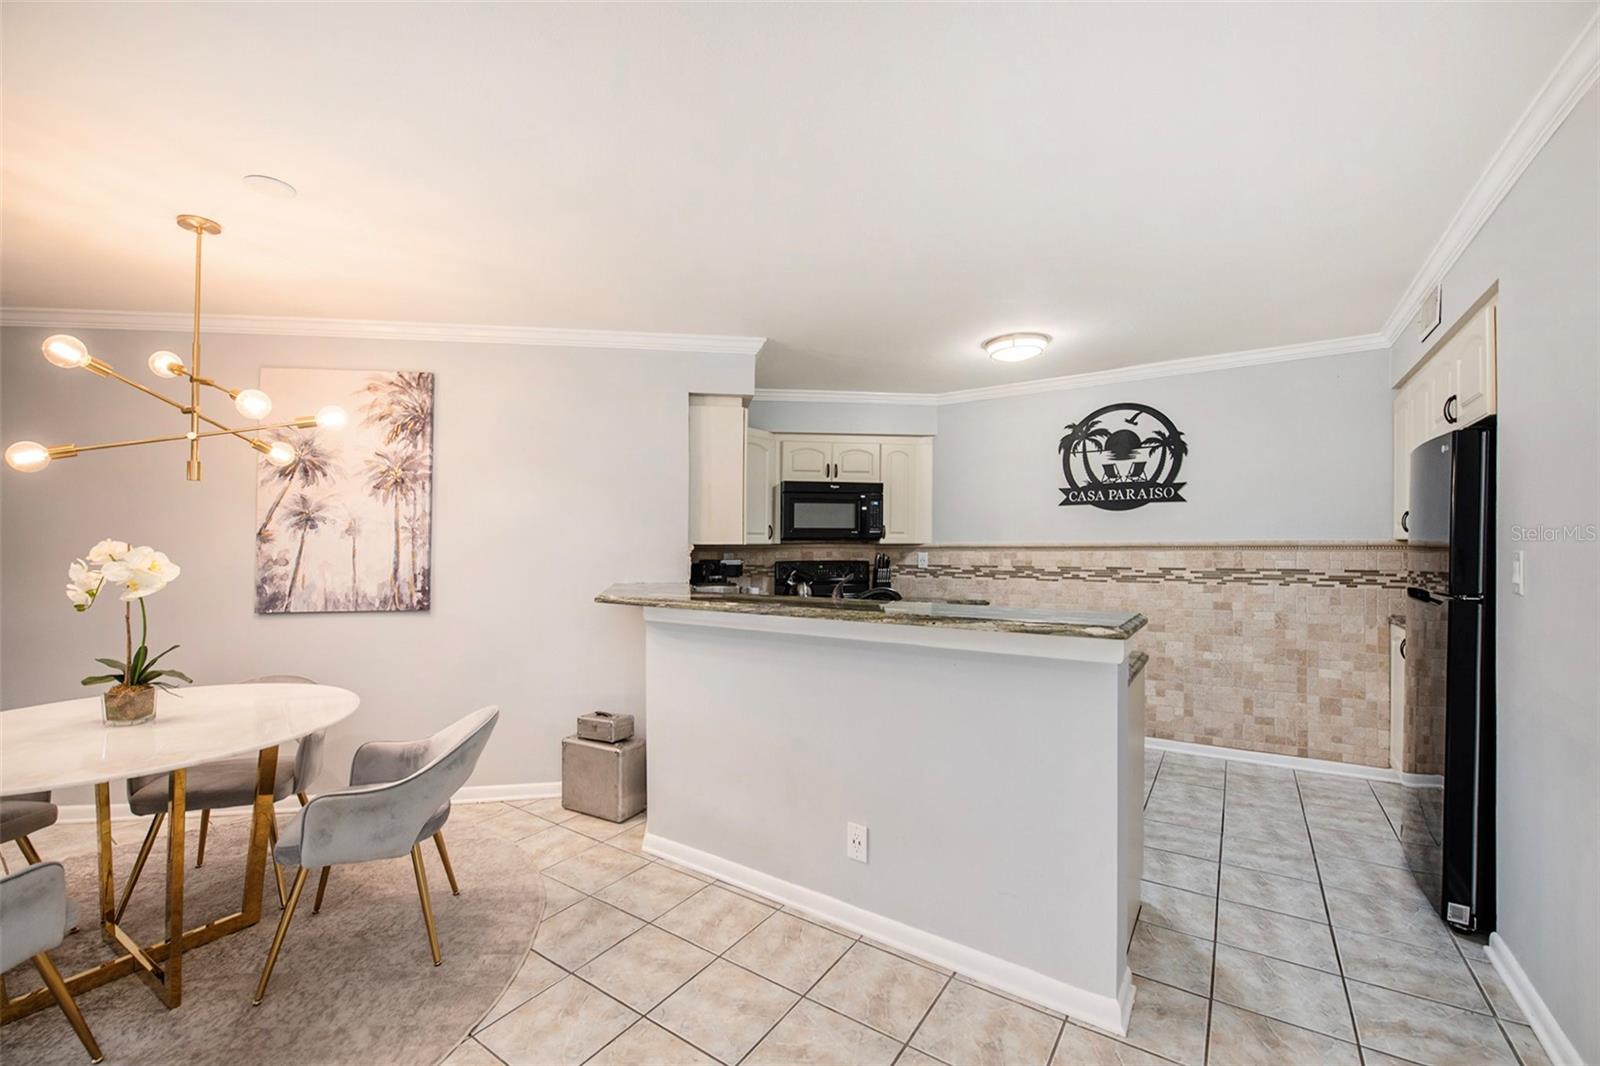 Your spacious kitchen with plenty of cabinetry and updated appliances